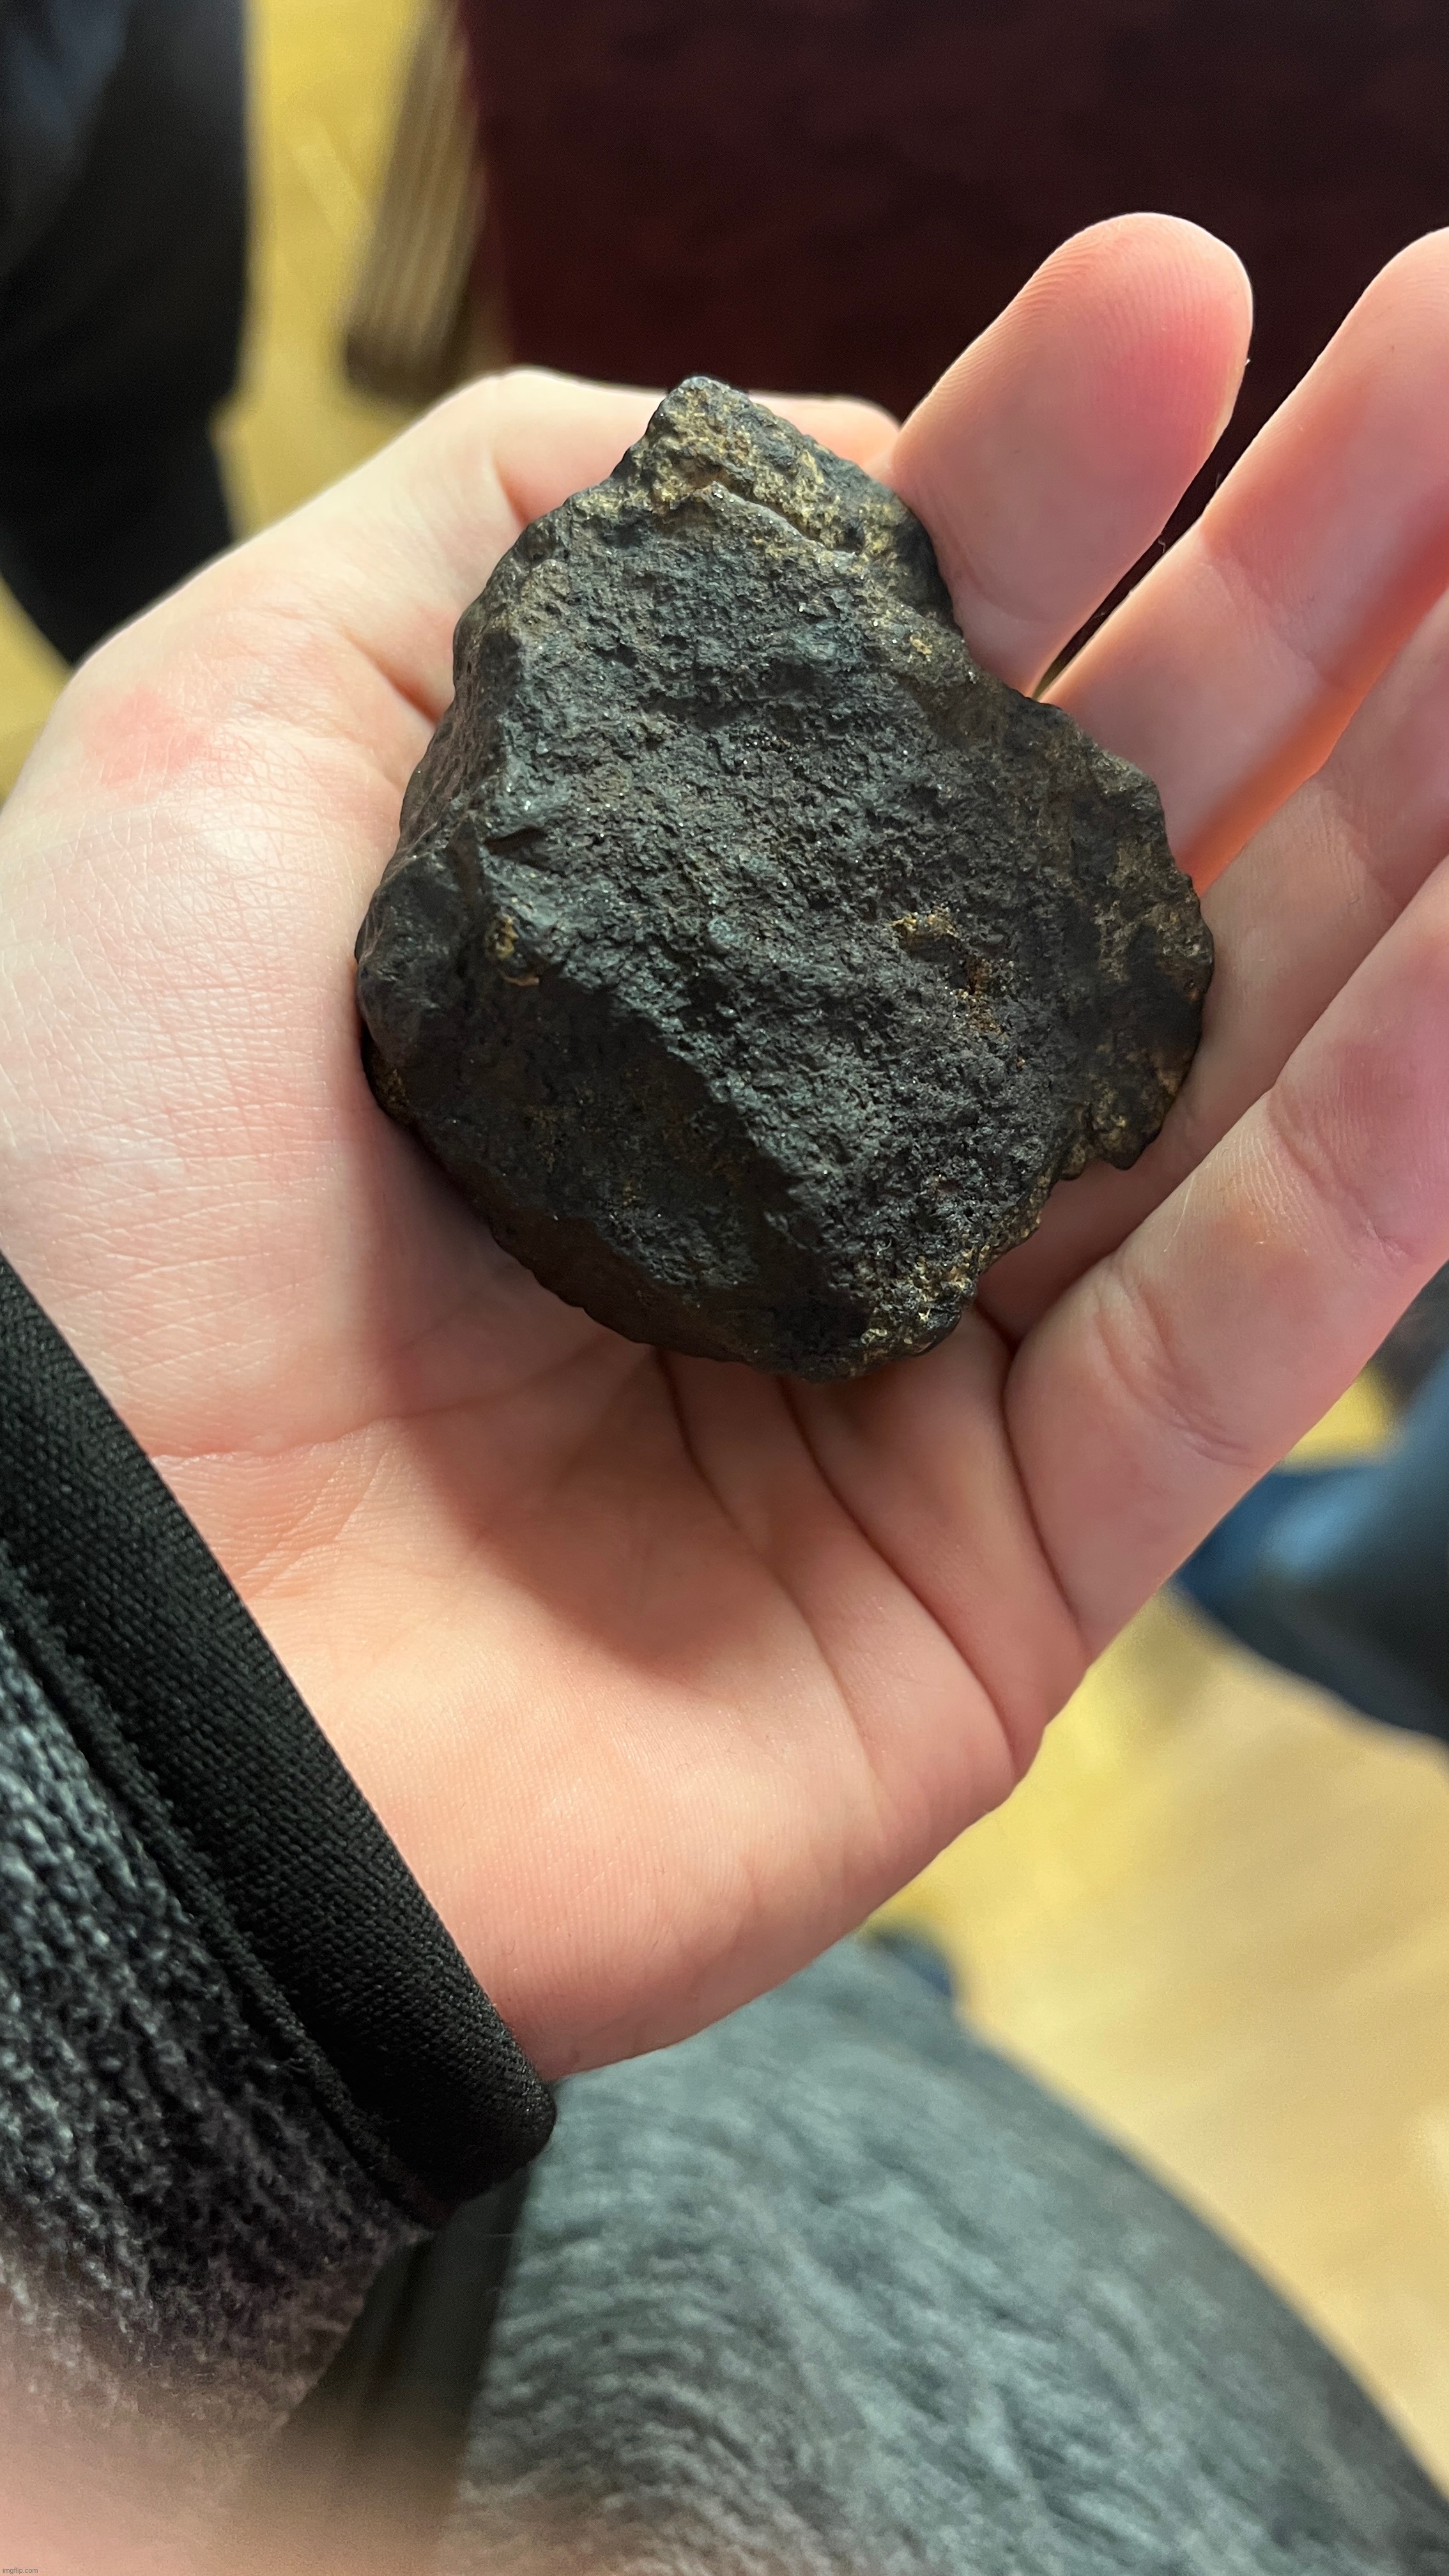 me holding a real meteorite | image tagged in share your own photos,meteorite,meteor,hand,holding | made w/ Imgflip meme maker